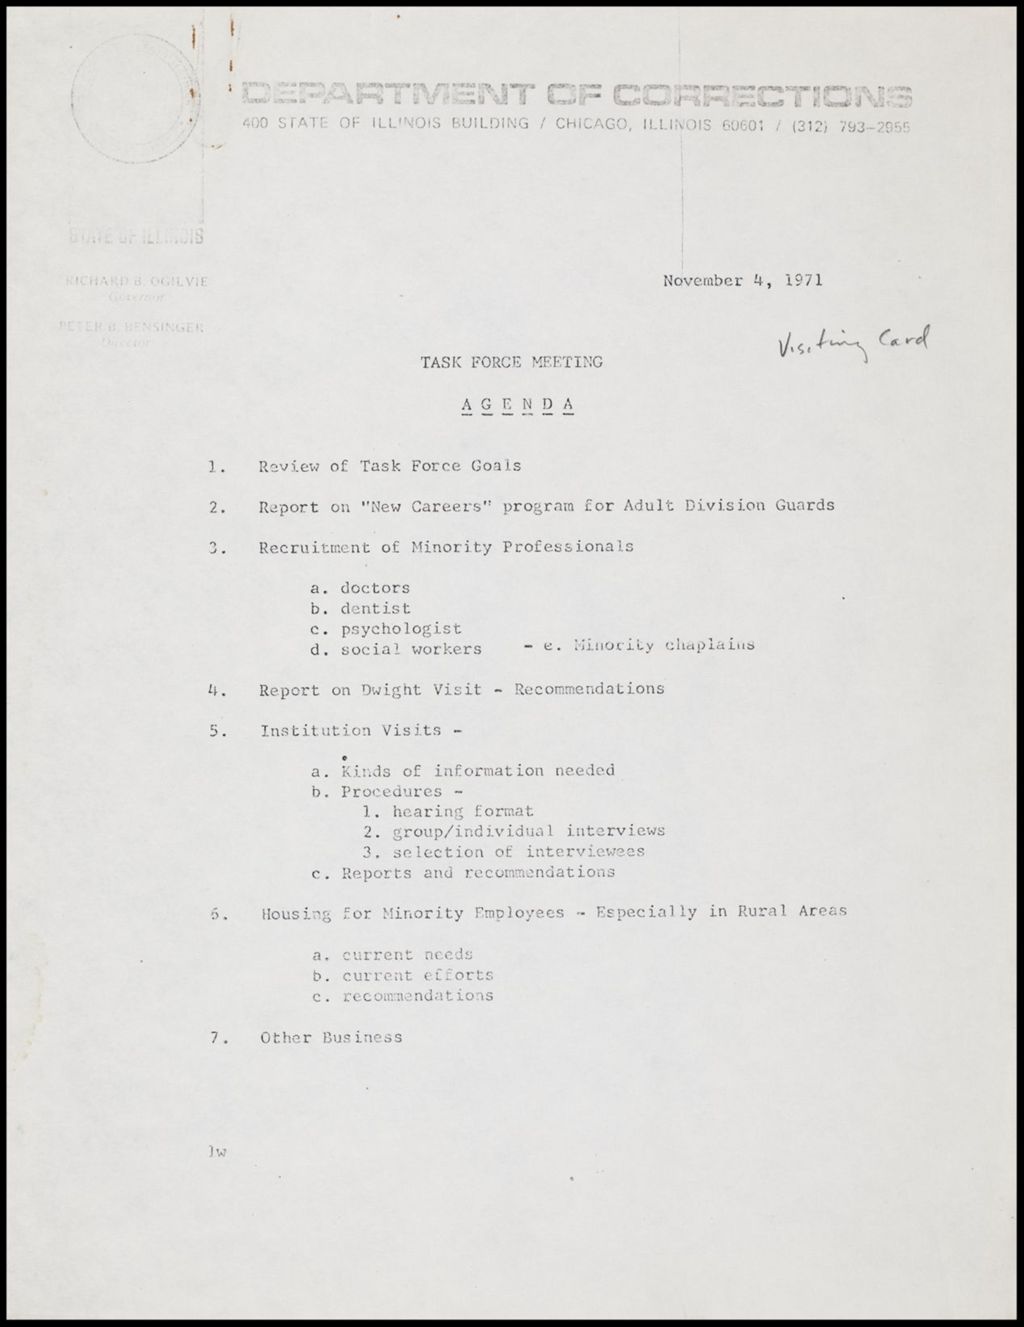 Fort Sheridan Correctional institution Research, 1971 (Folder III-1888)